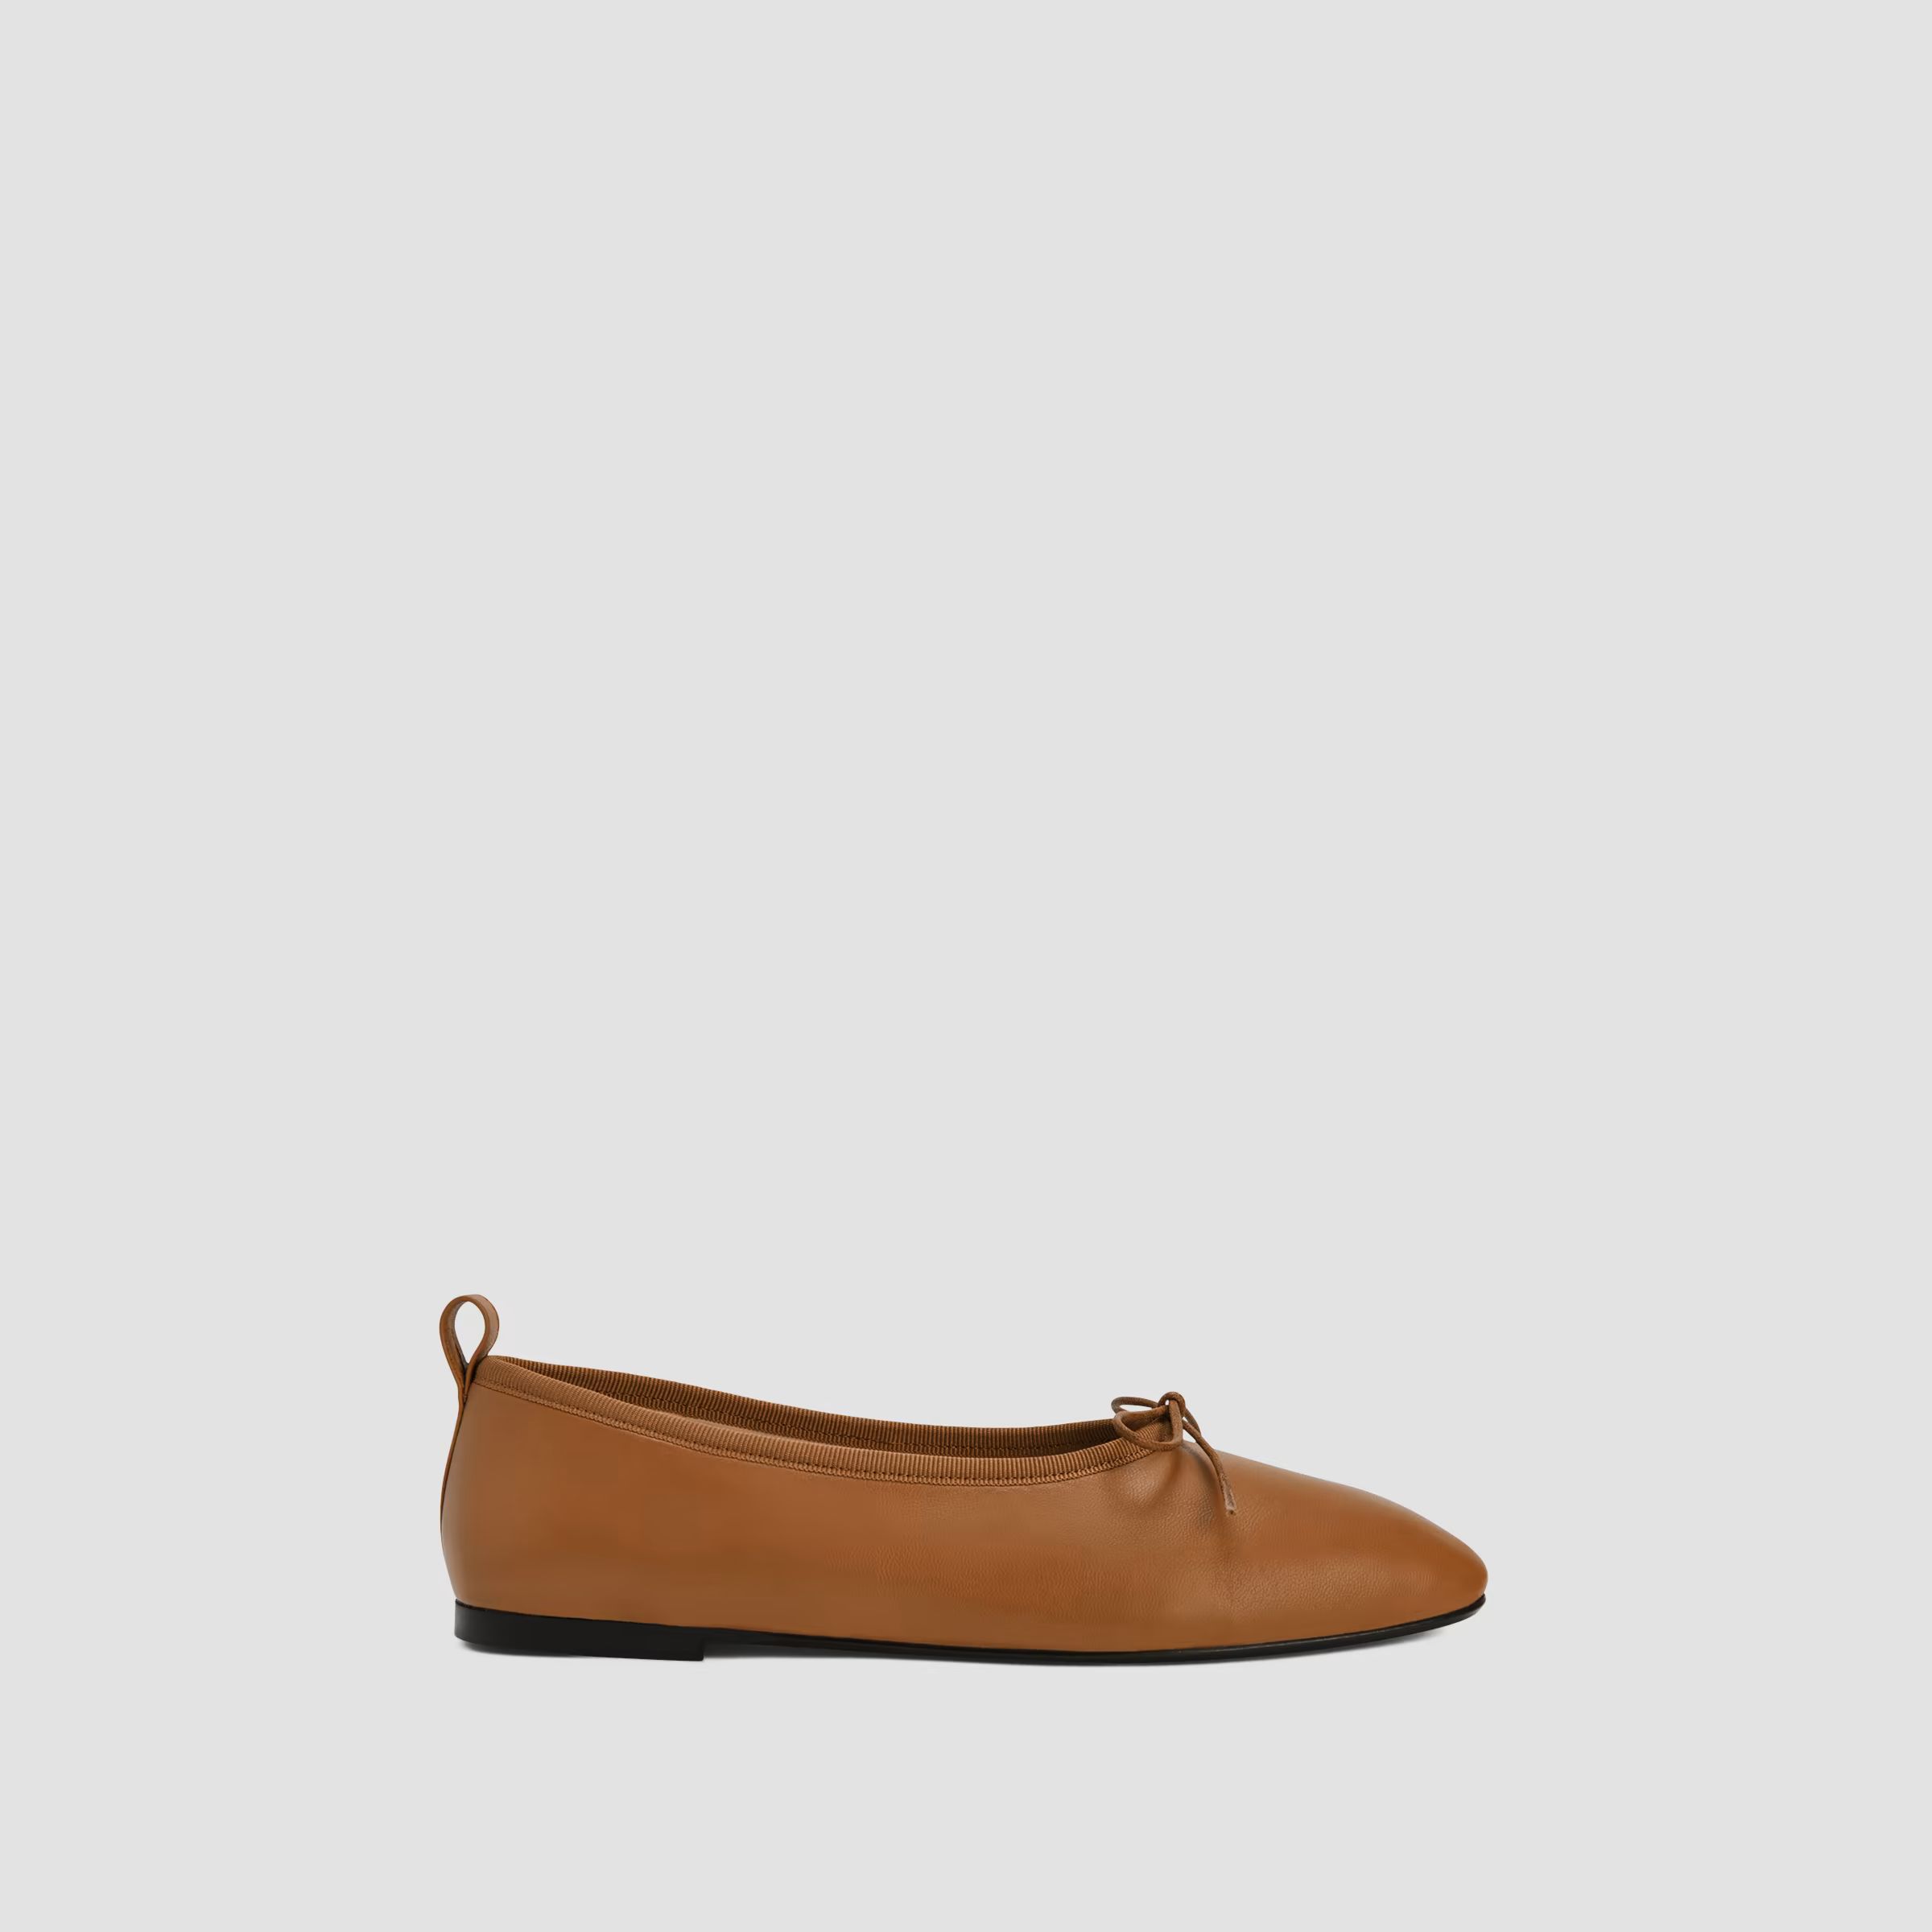 The Day Ballet Flat | Everlane